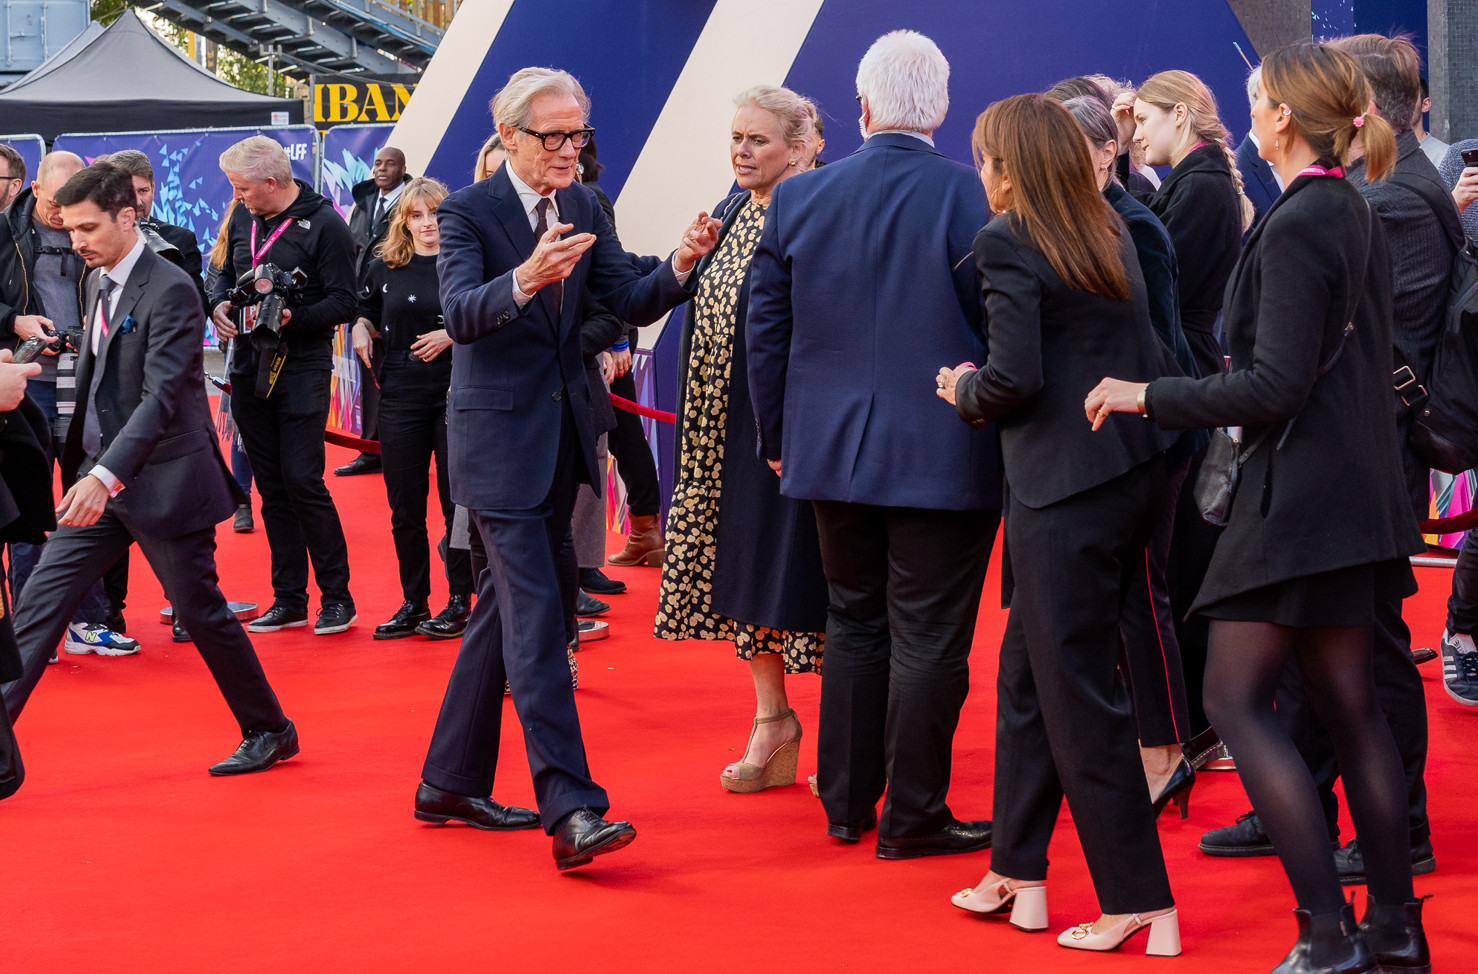 Cast and Crew of the film Living attends the Red carpet at the BFI London  Film Festival 2022